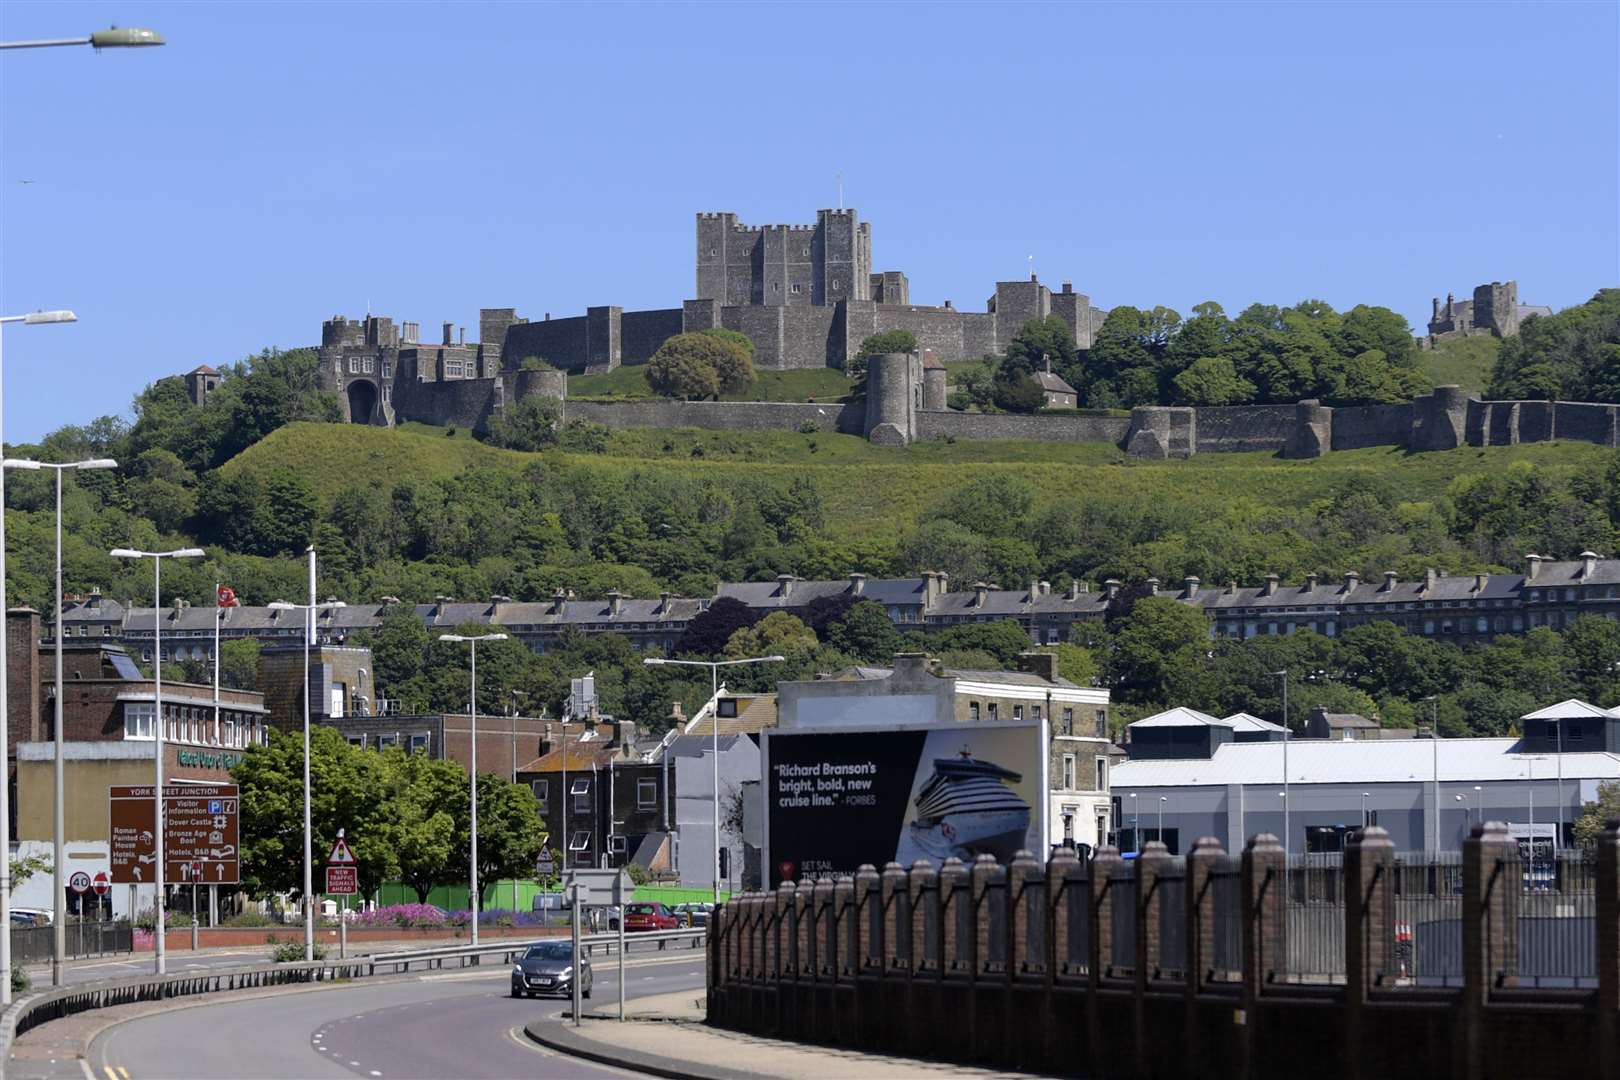 A cable car could link Dover Castle with the town below. Picture: Barry Goodwin